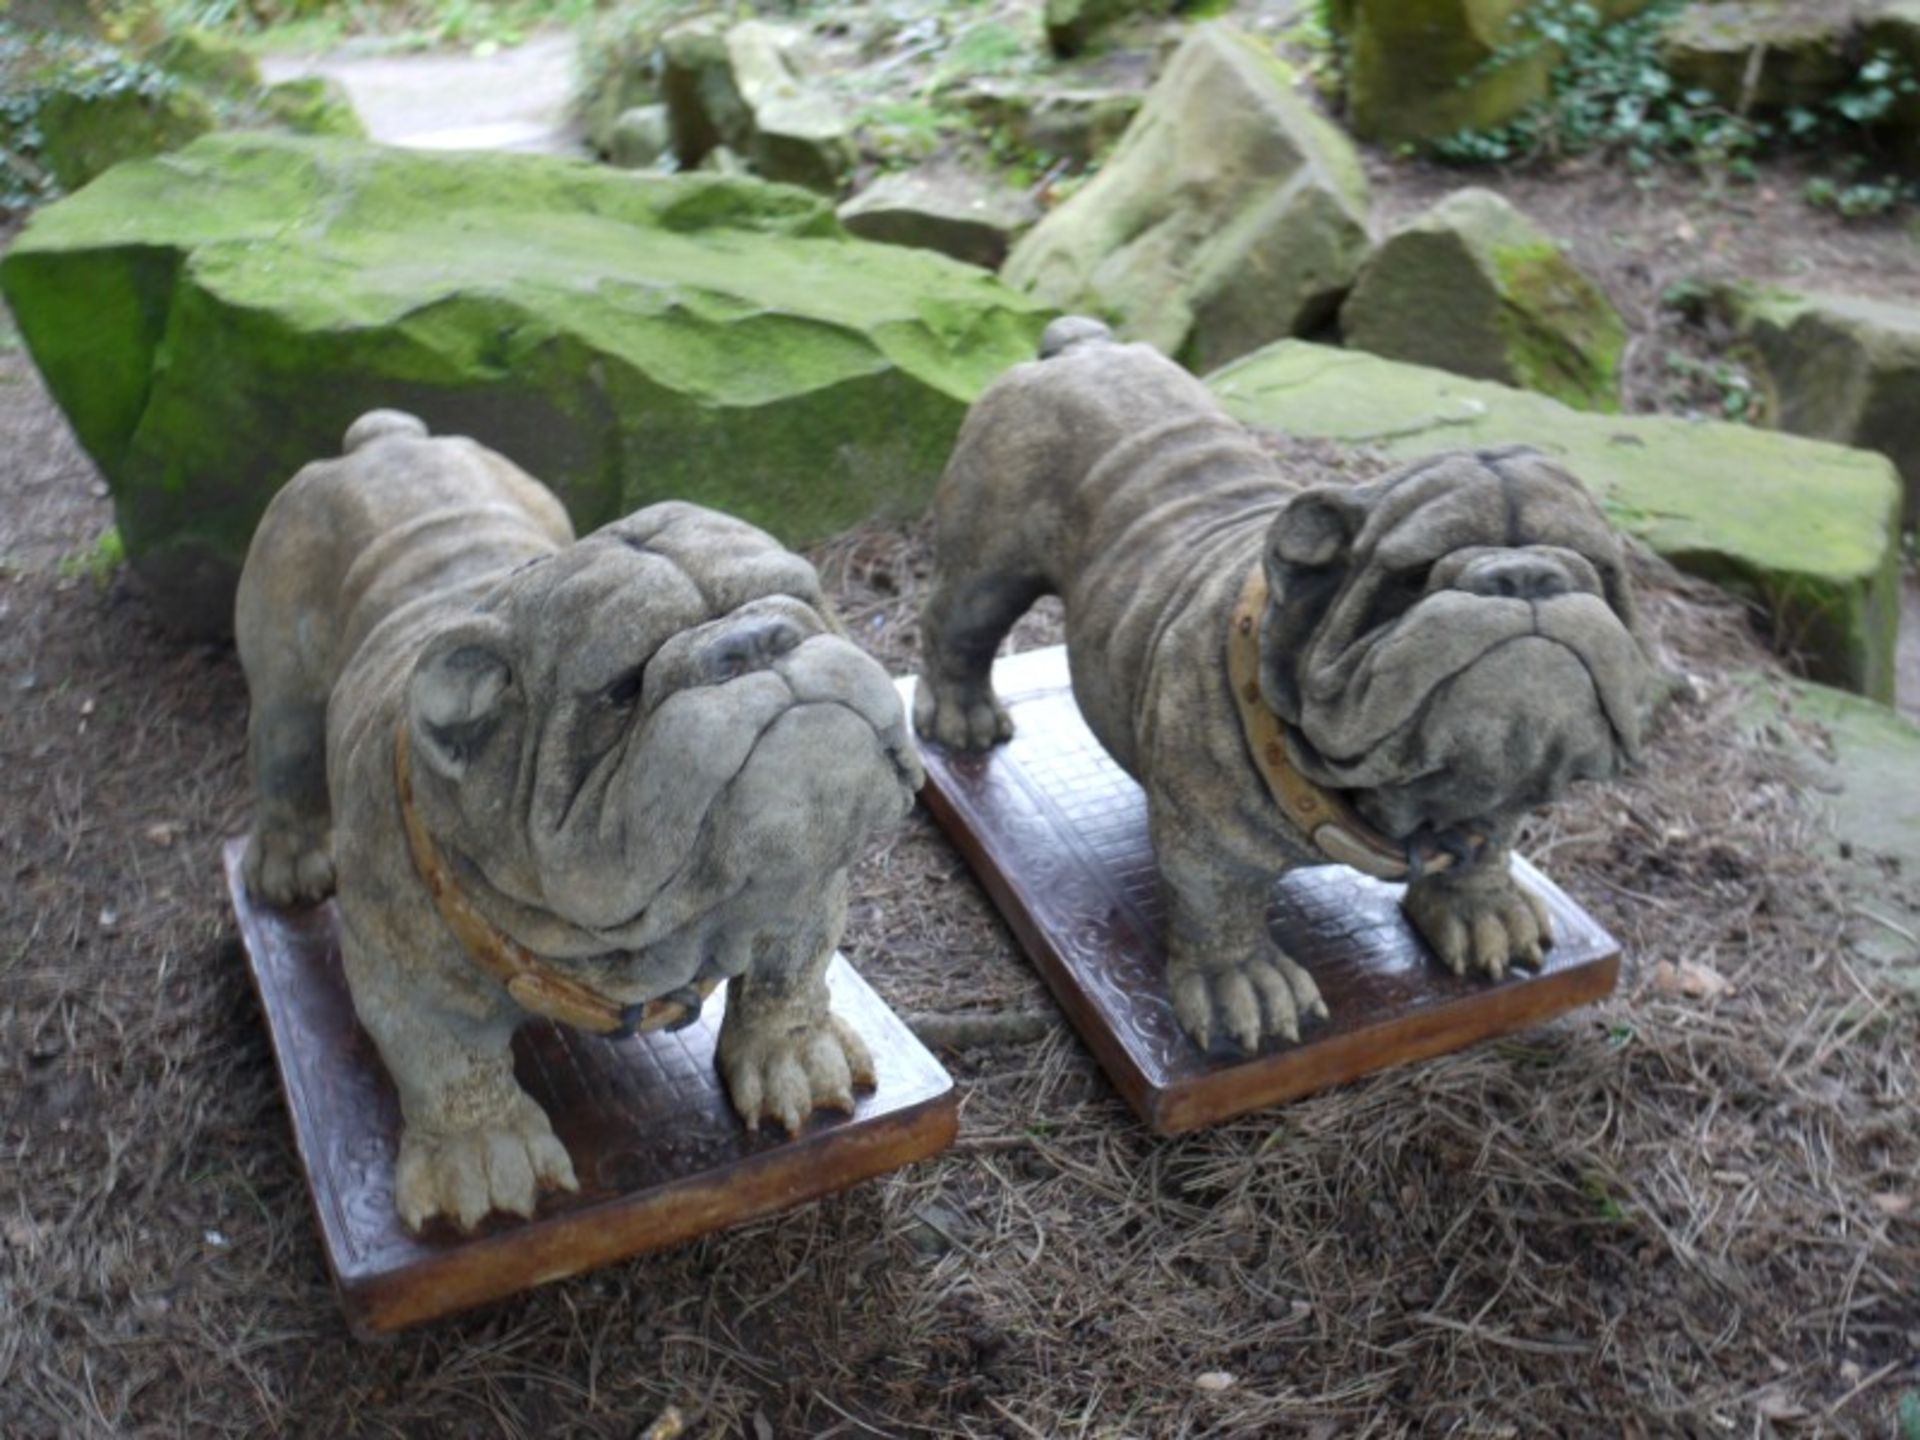 PAIR OF BULLDOGS   DIMENSIONS: Length: 65 cm Width: 33 cm Height: 40 cm   COLLECTION / VIEWING - Image 2 of 6